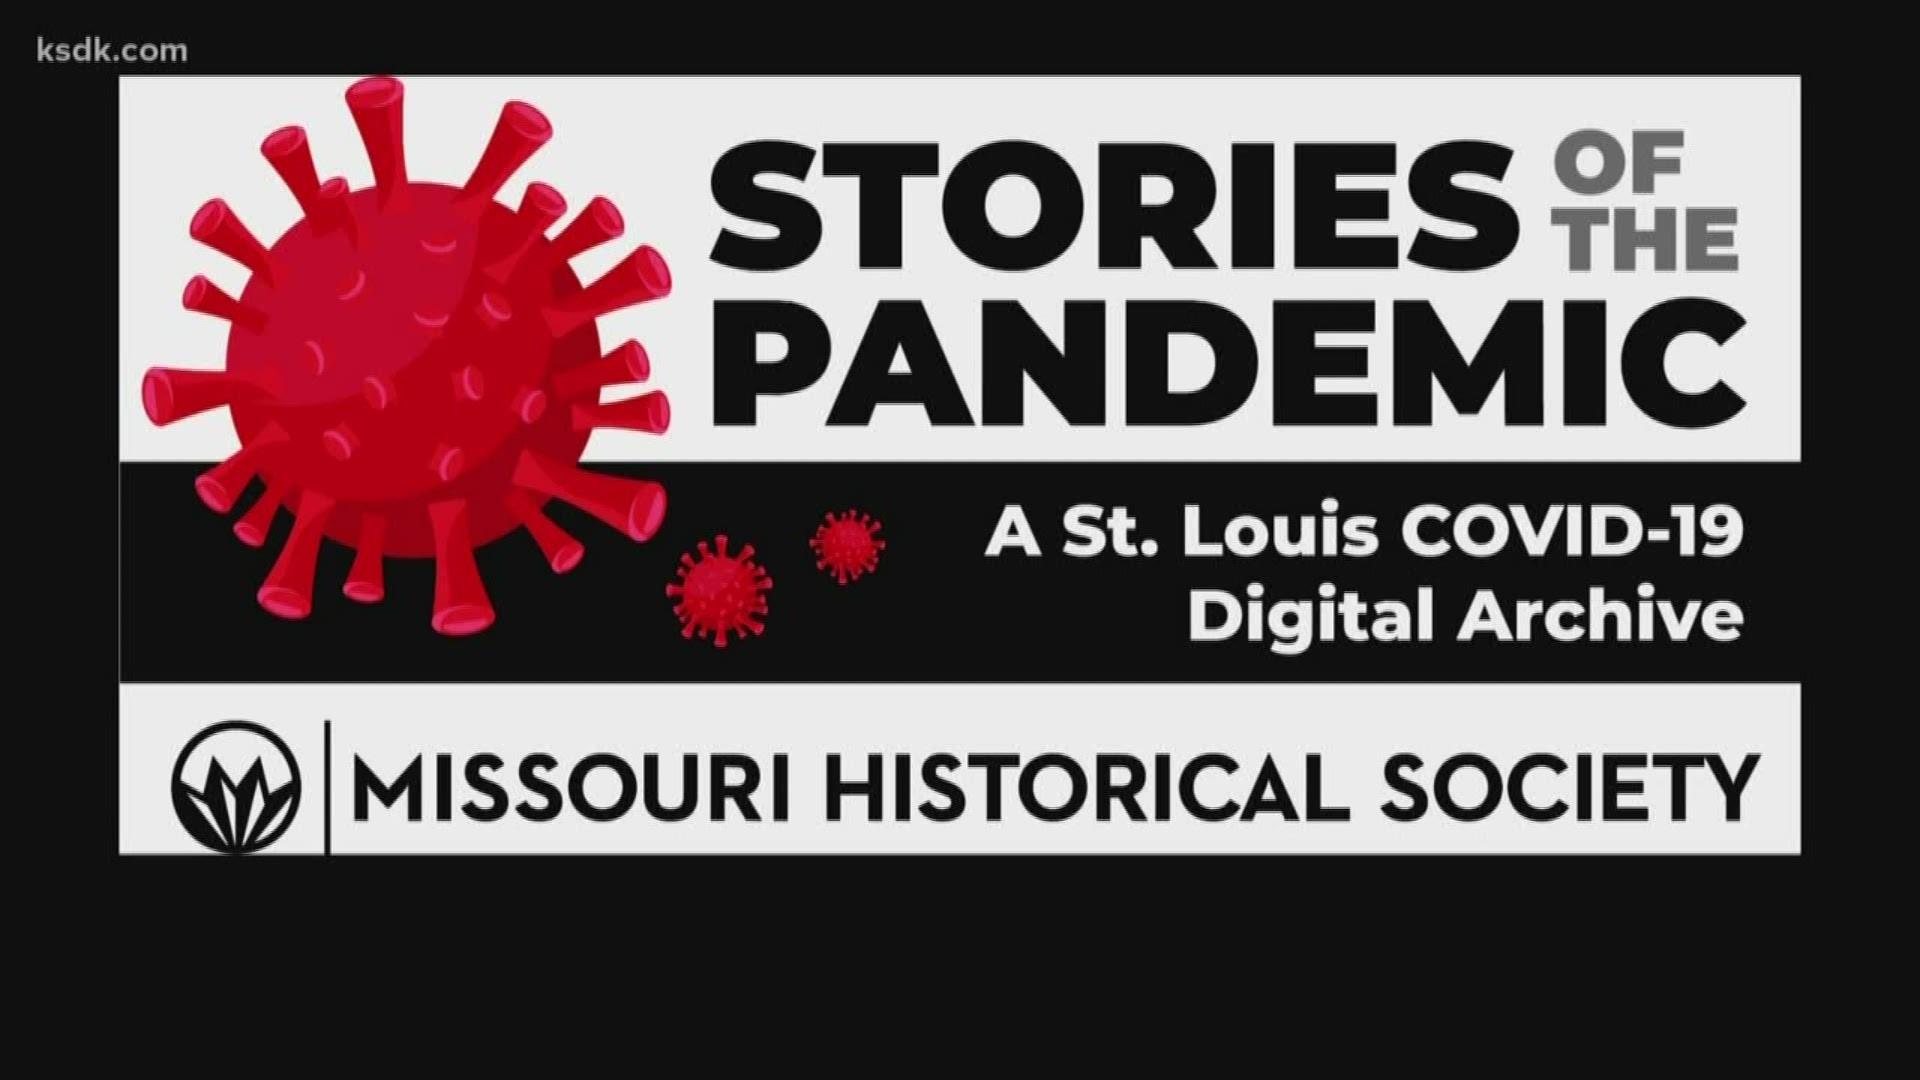 Missouri Historical Society is seeking the ‘Stories of the Pandemic’ for a new digital display